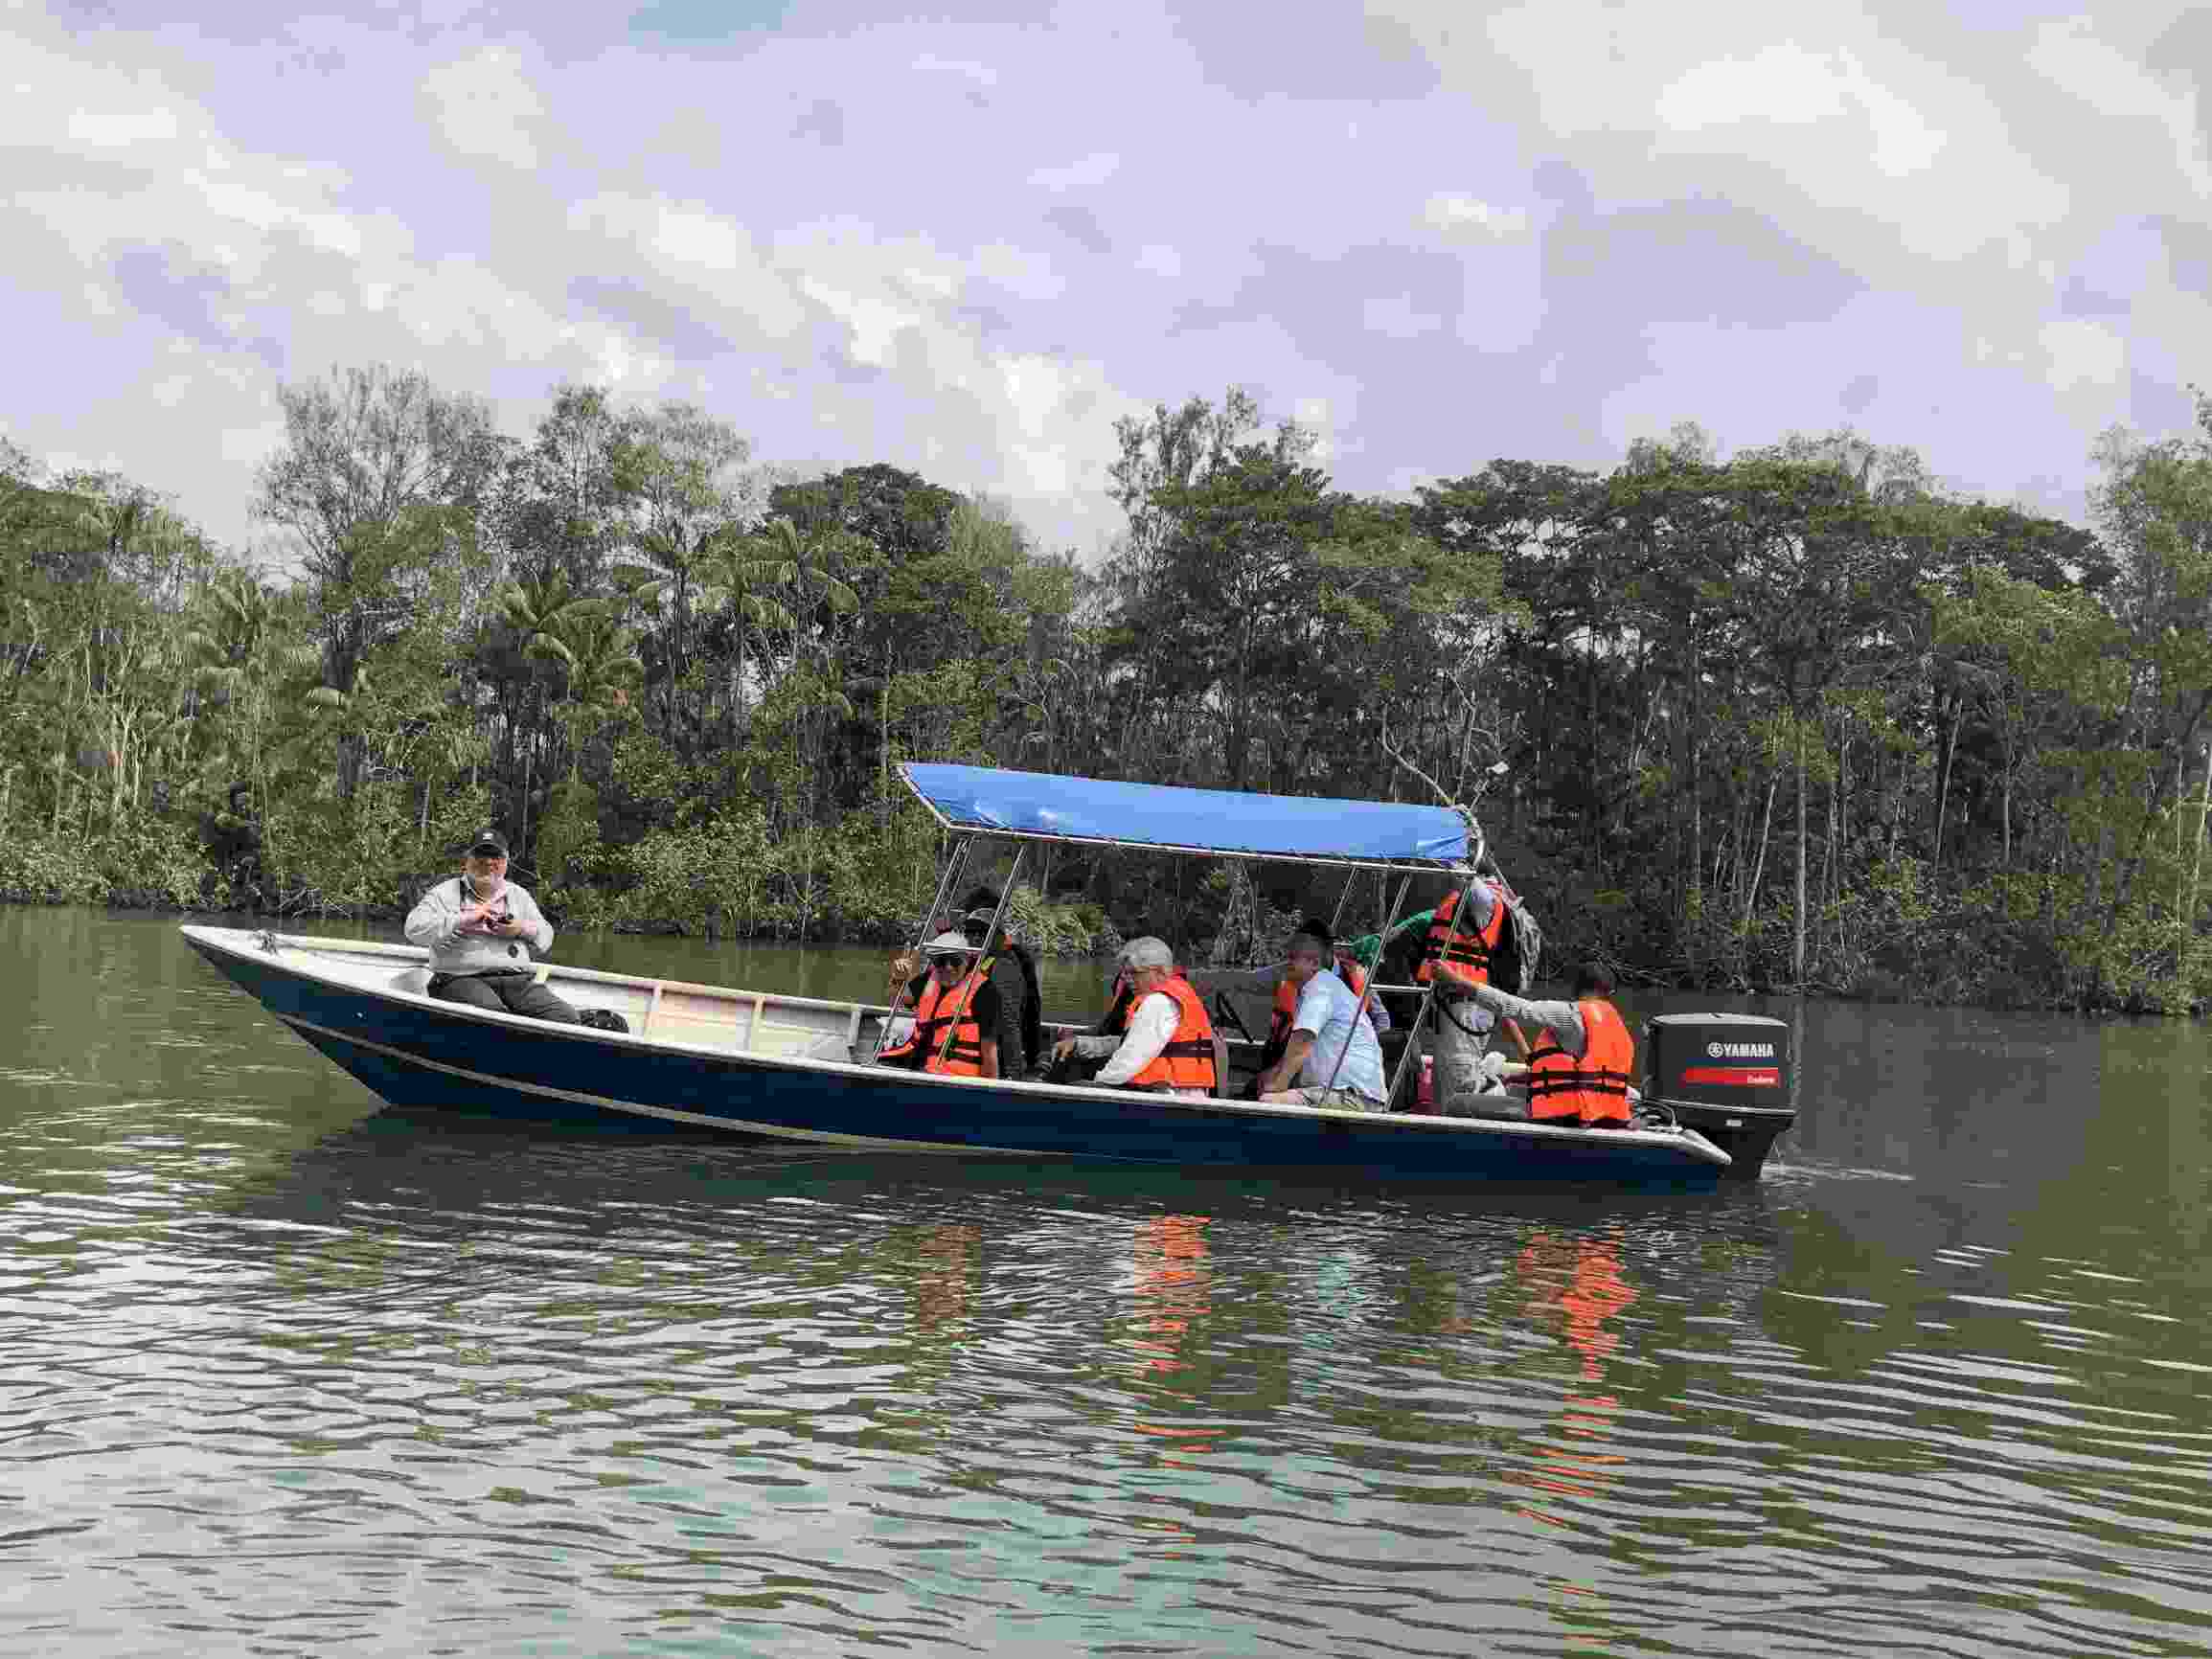 Image shows Hub members in a small motor boat on the Johor River, with green trees and palms behind